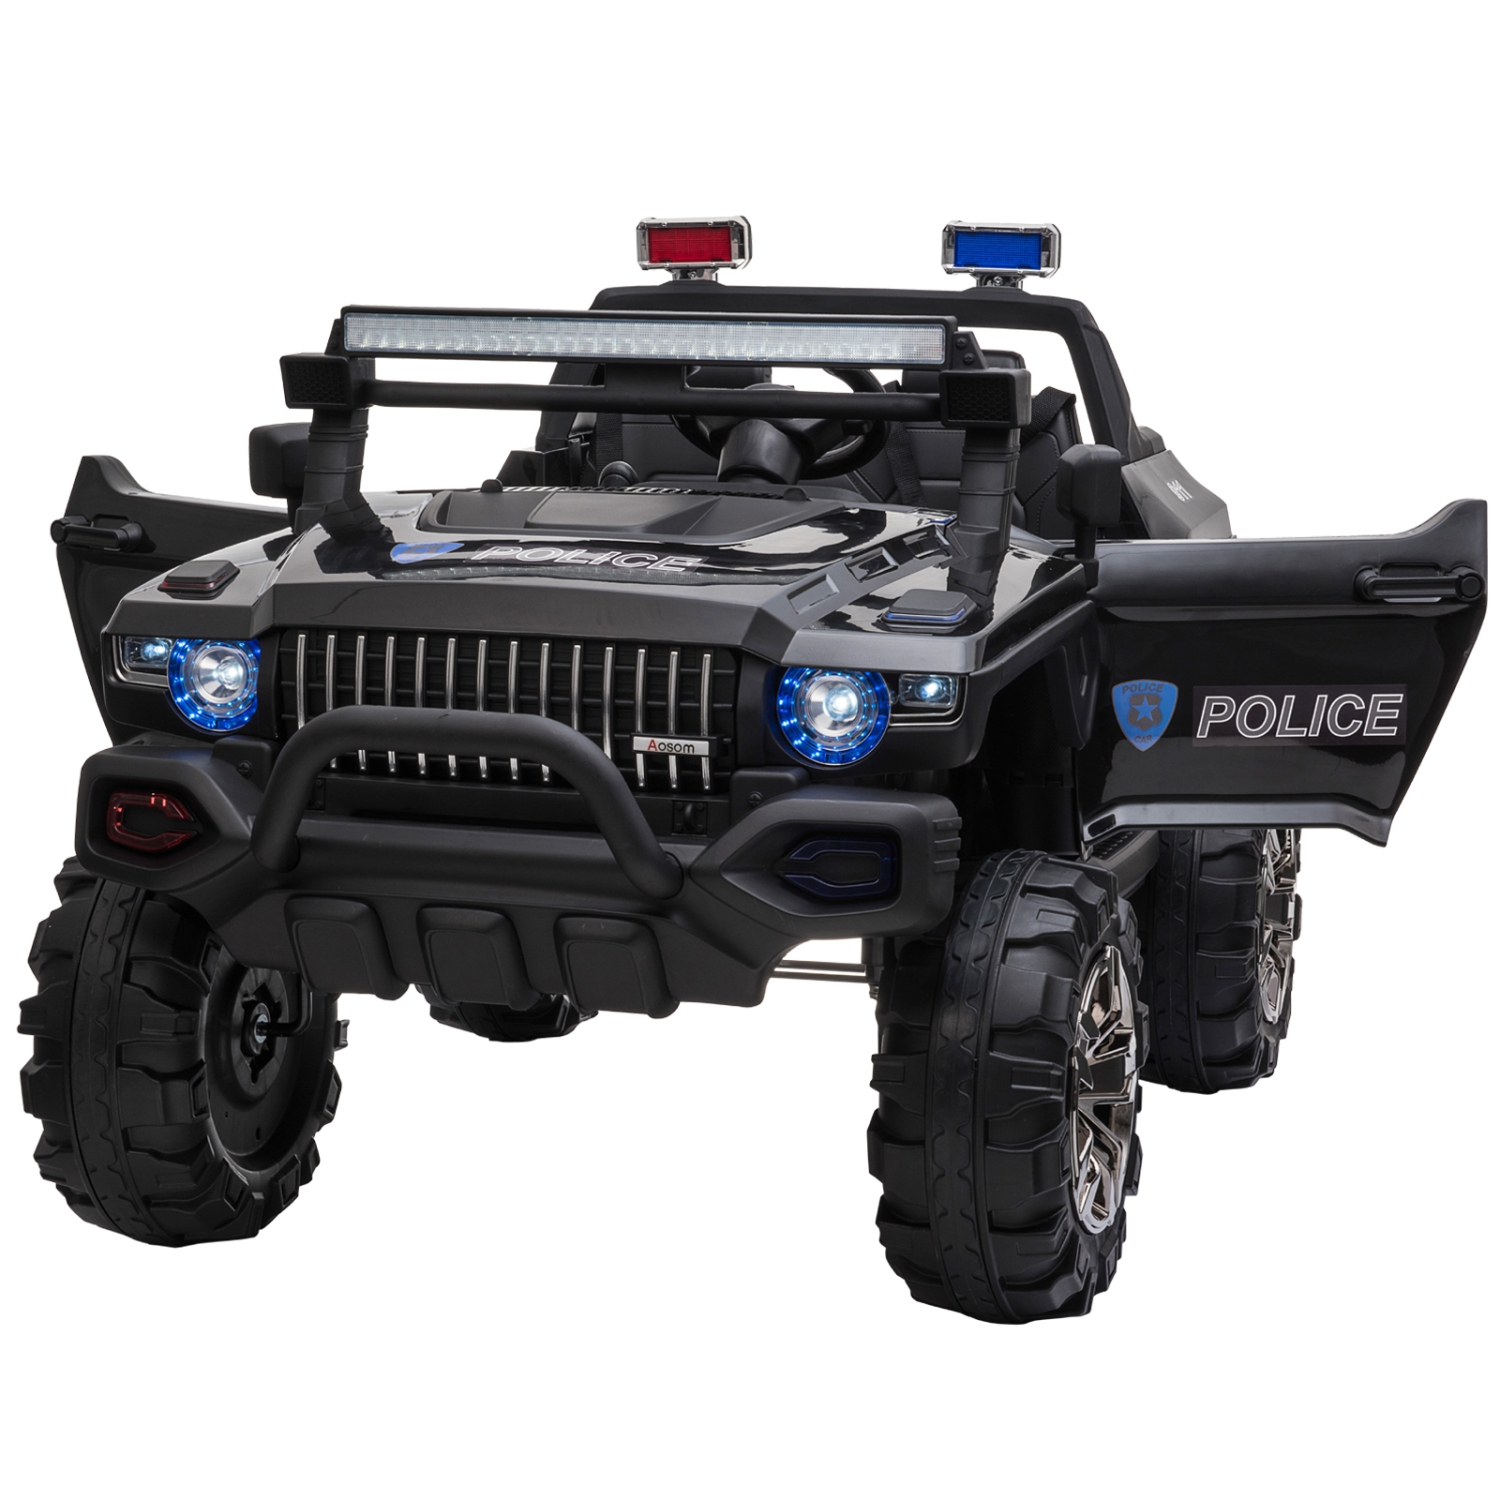 Aosom Kids Ride-On Car 12V RC 2-Seater Police Truck Electric Car For Kids with Full LED Lights, MP3, Parental Remote Control (Black)